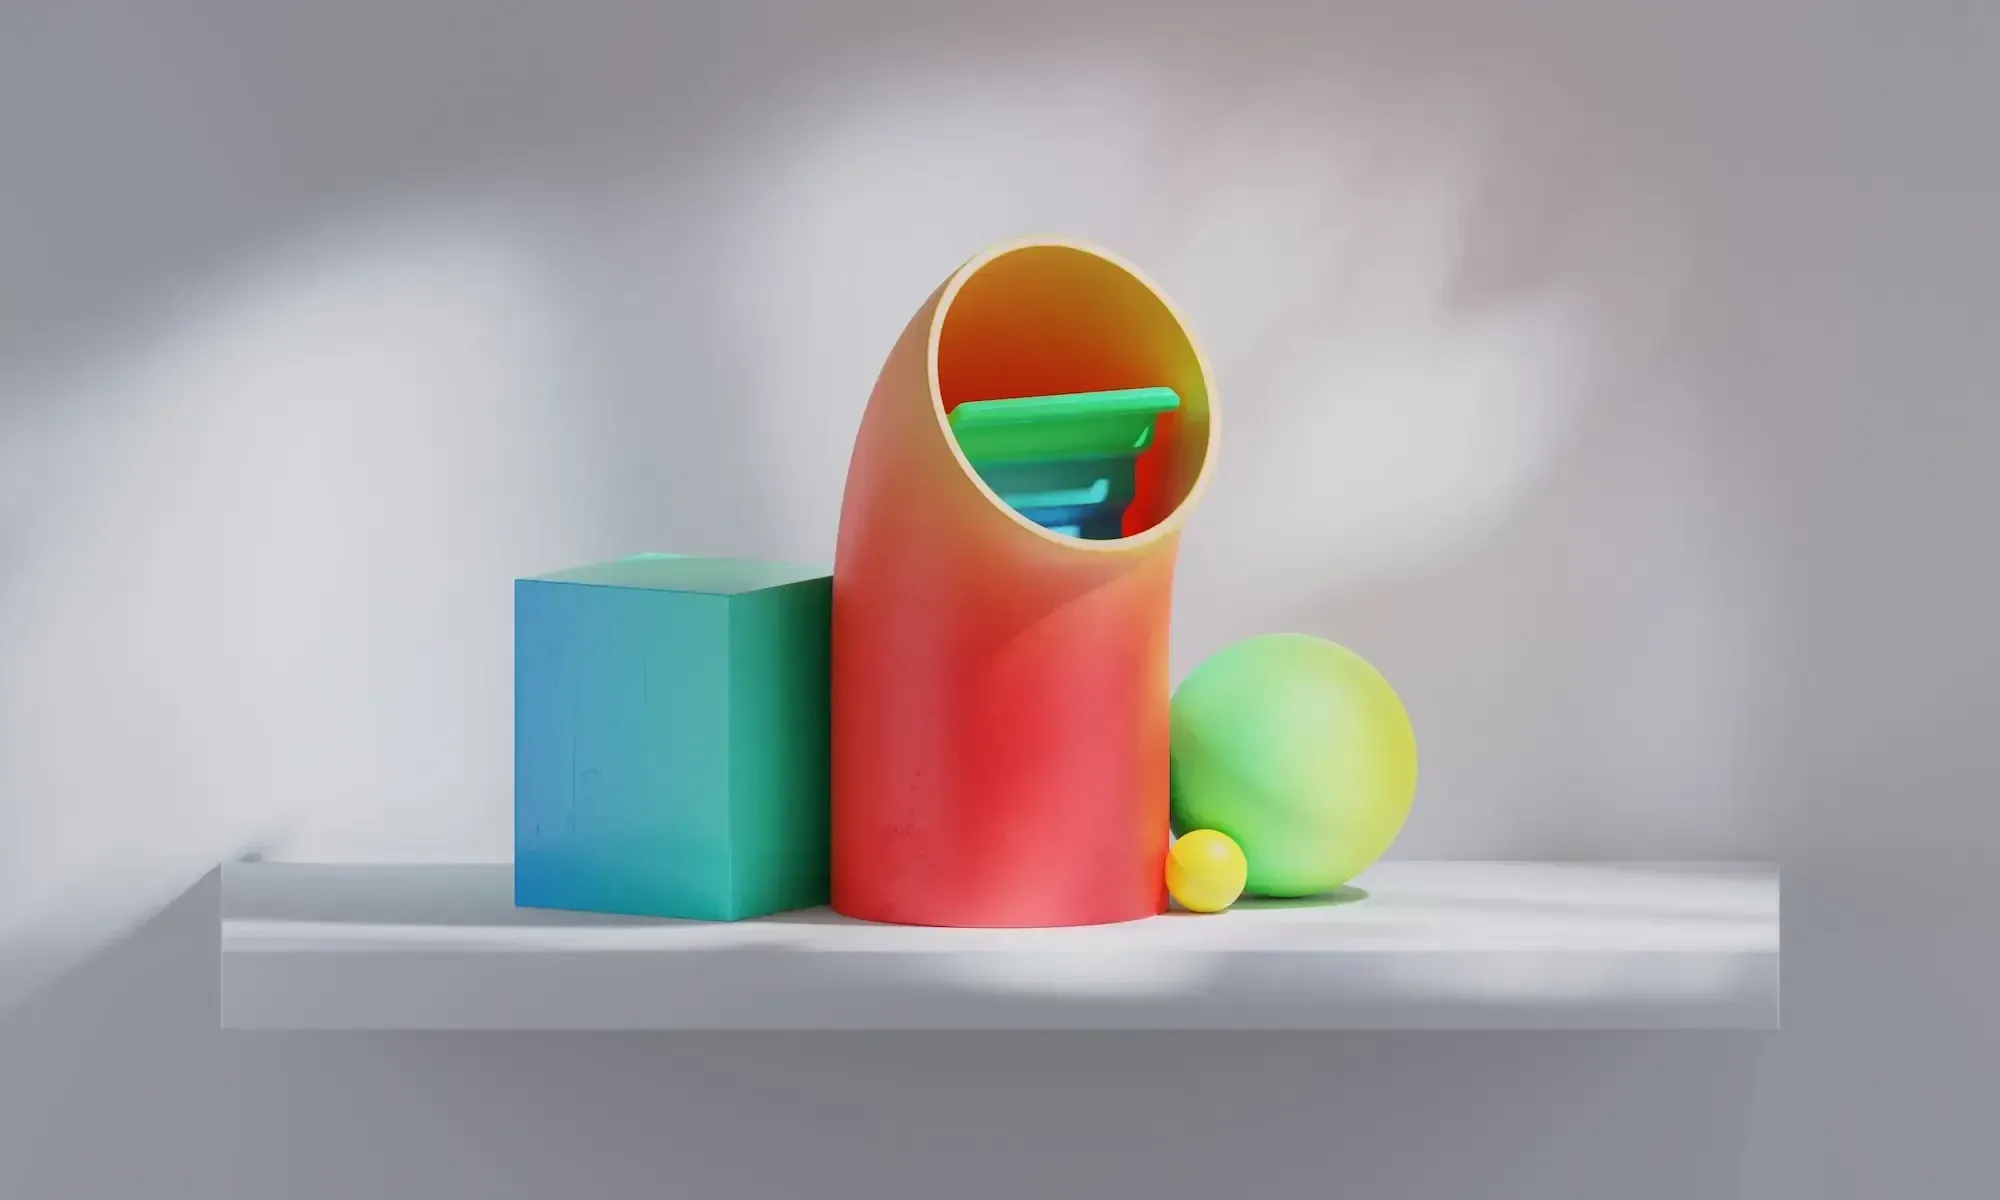 Blue cube, orange tube, yellow small ball and green large ball in 3D on a grey background.